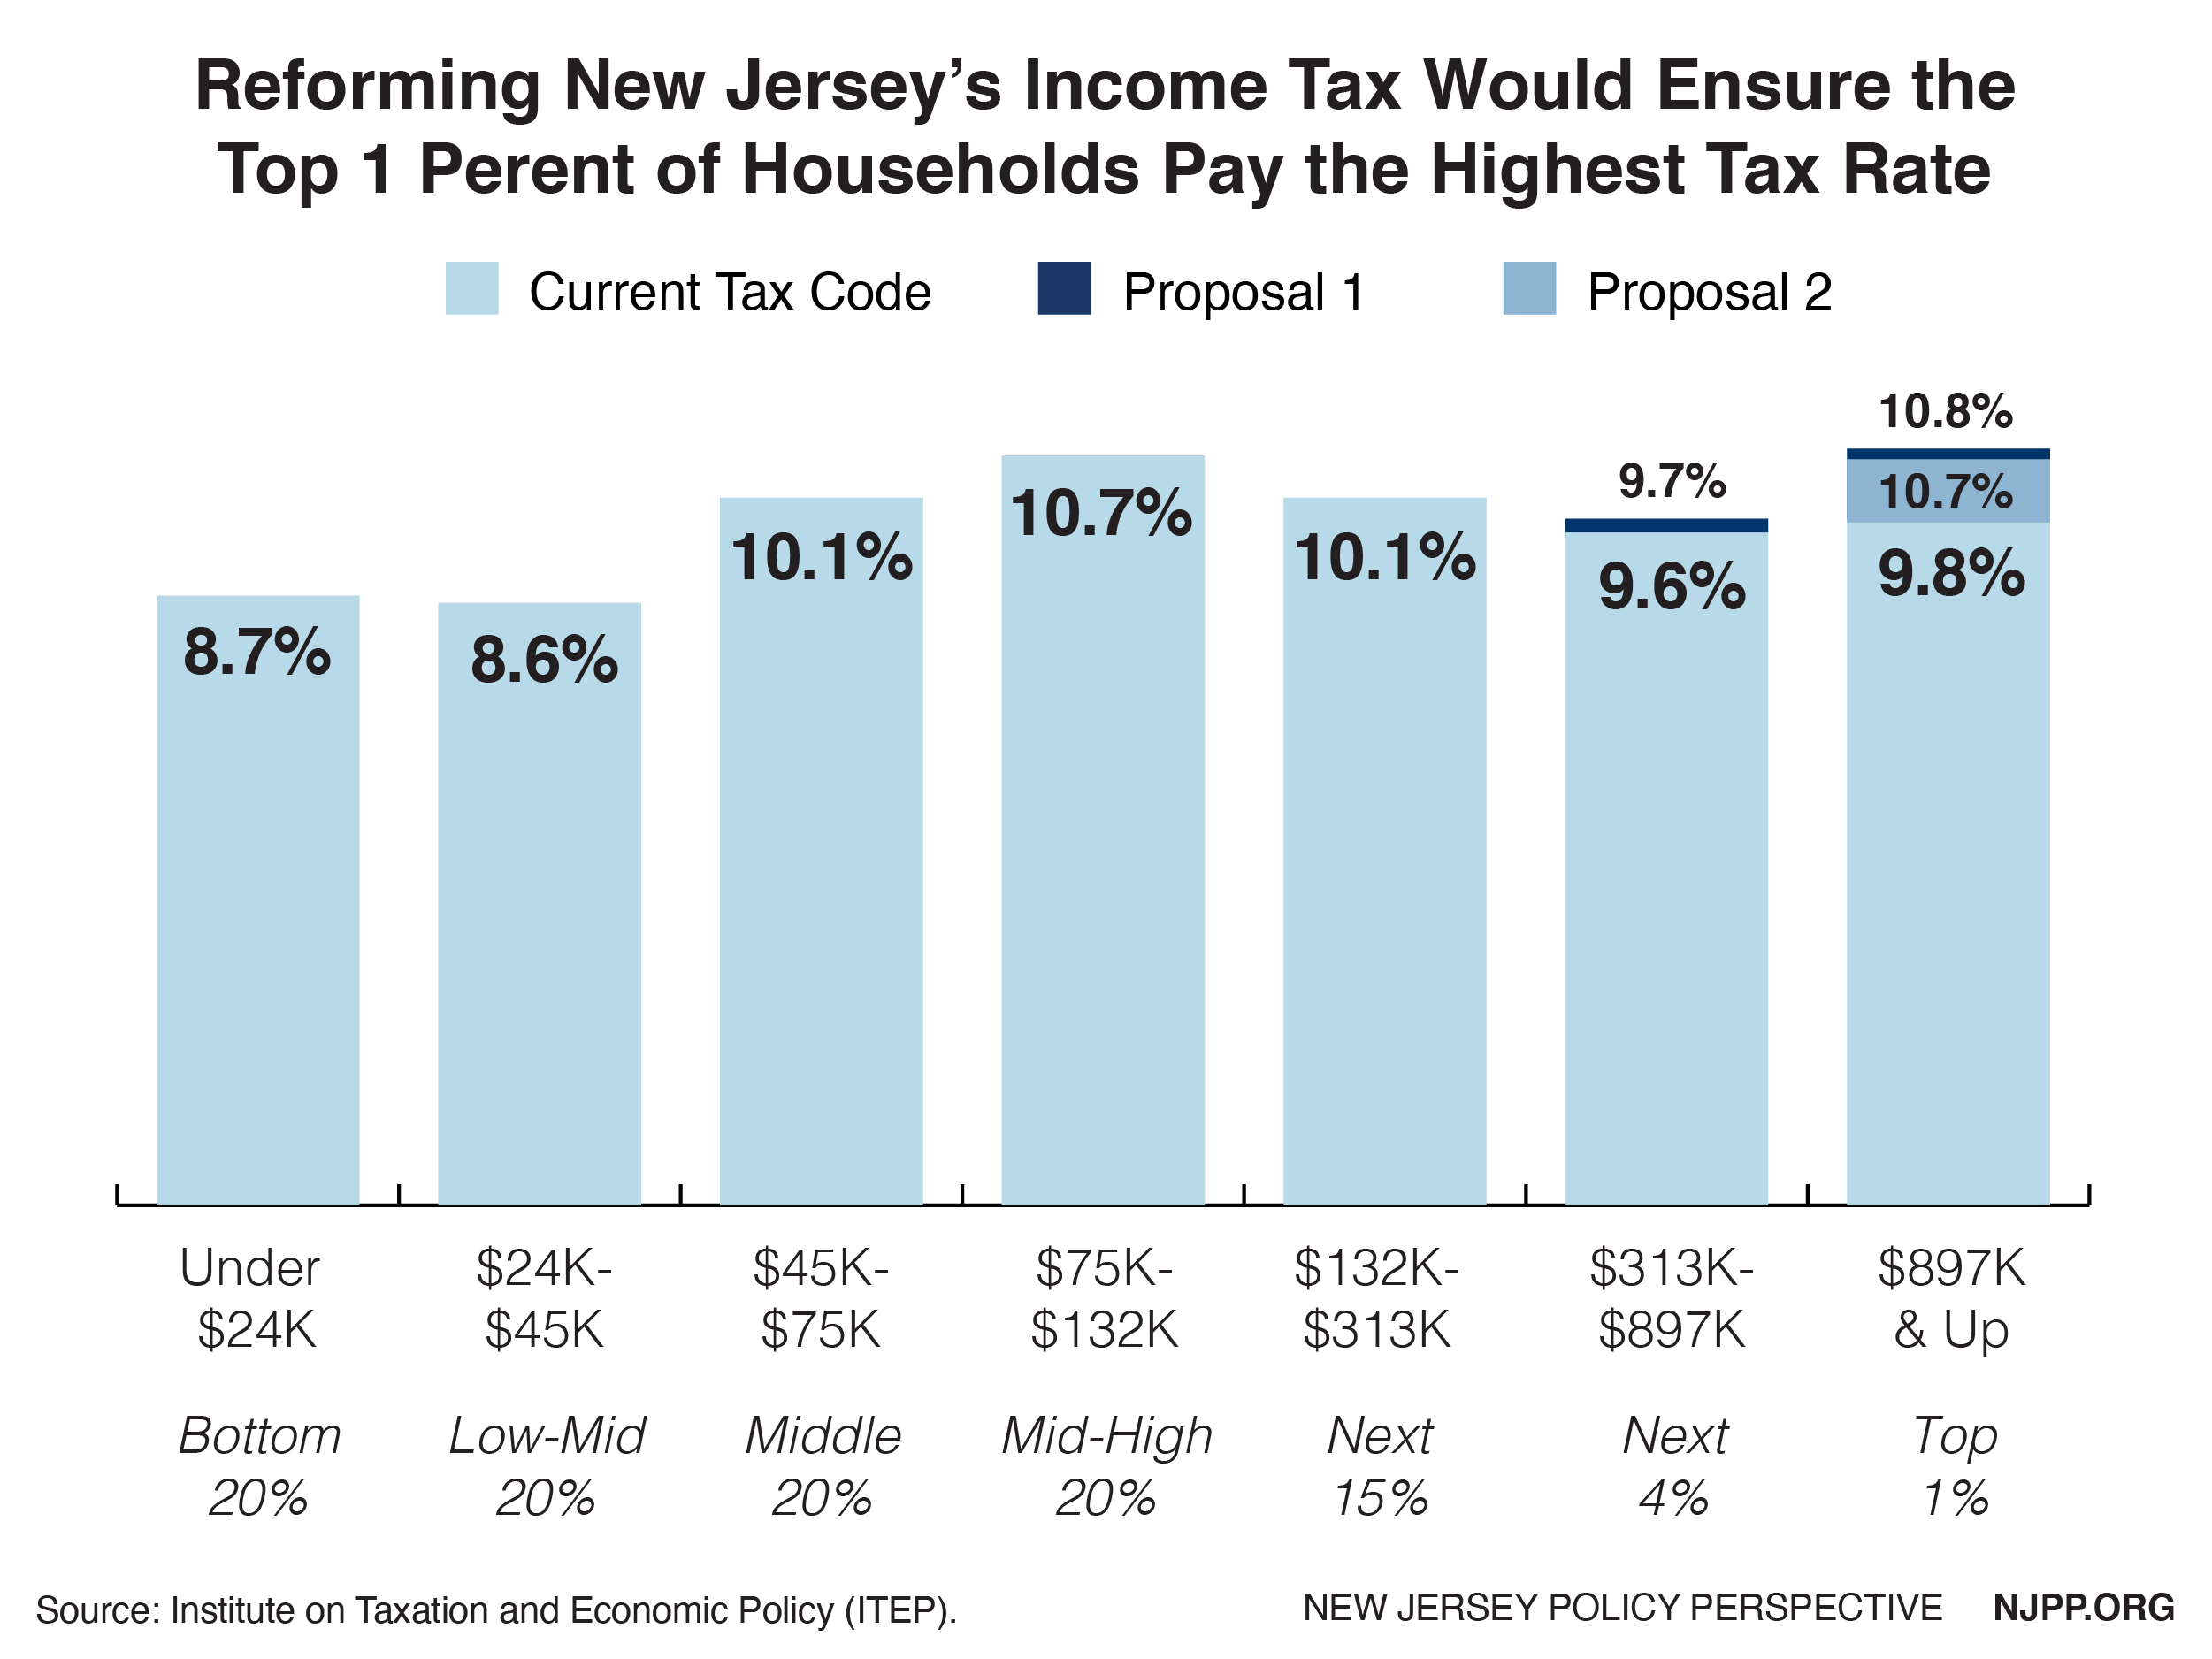 Graph: Reforming New Jersey's income tax would ensure the top 1 percent of households pay the highest tax rate.